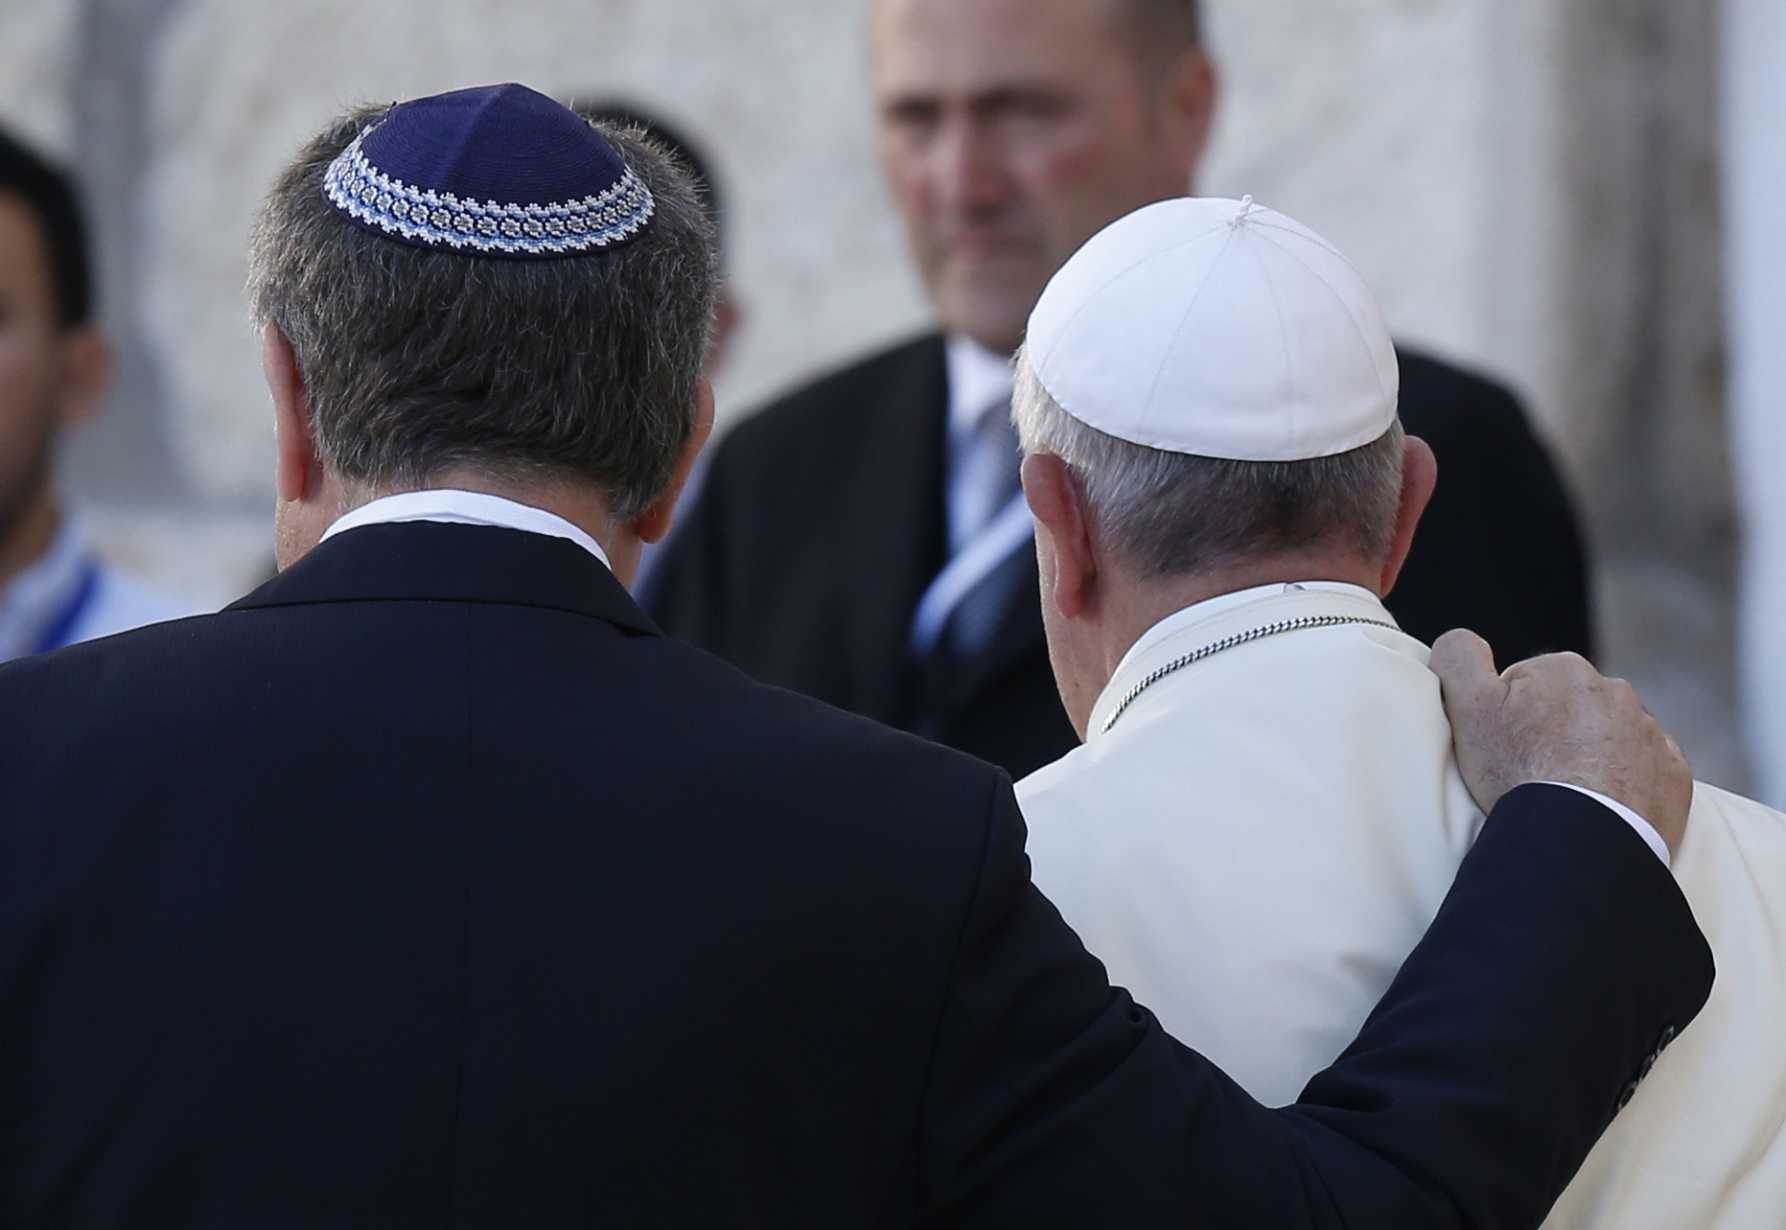 Israeli, Jewish reaction to papal overture conspicuous by its restraint